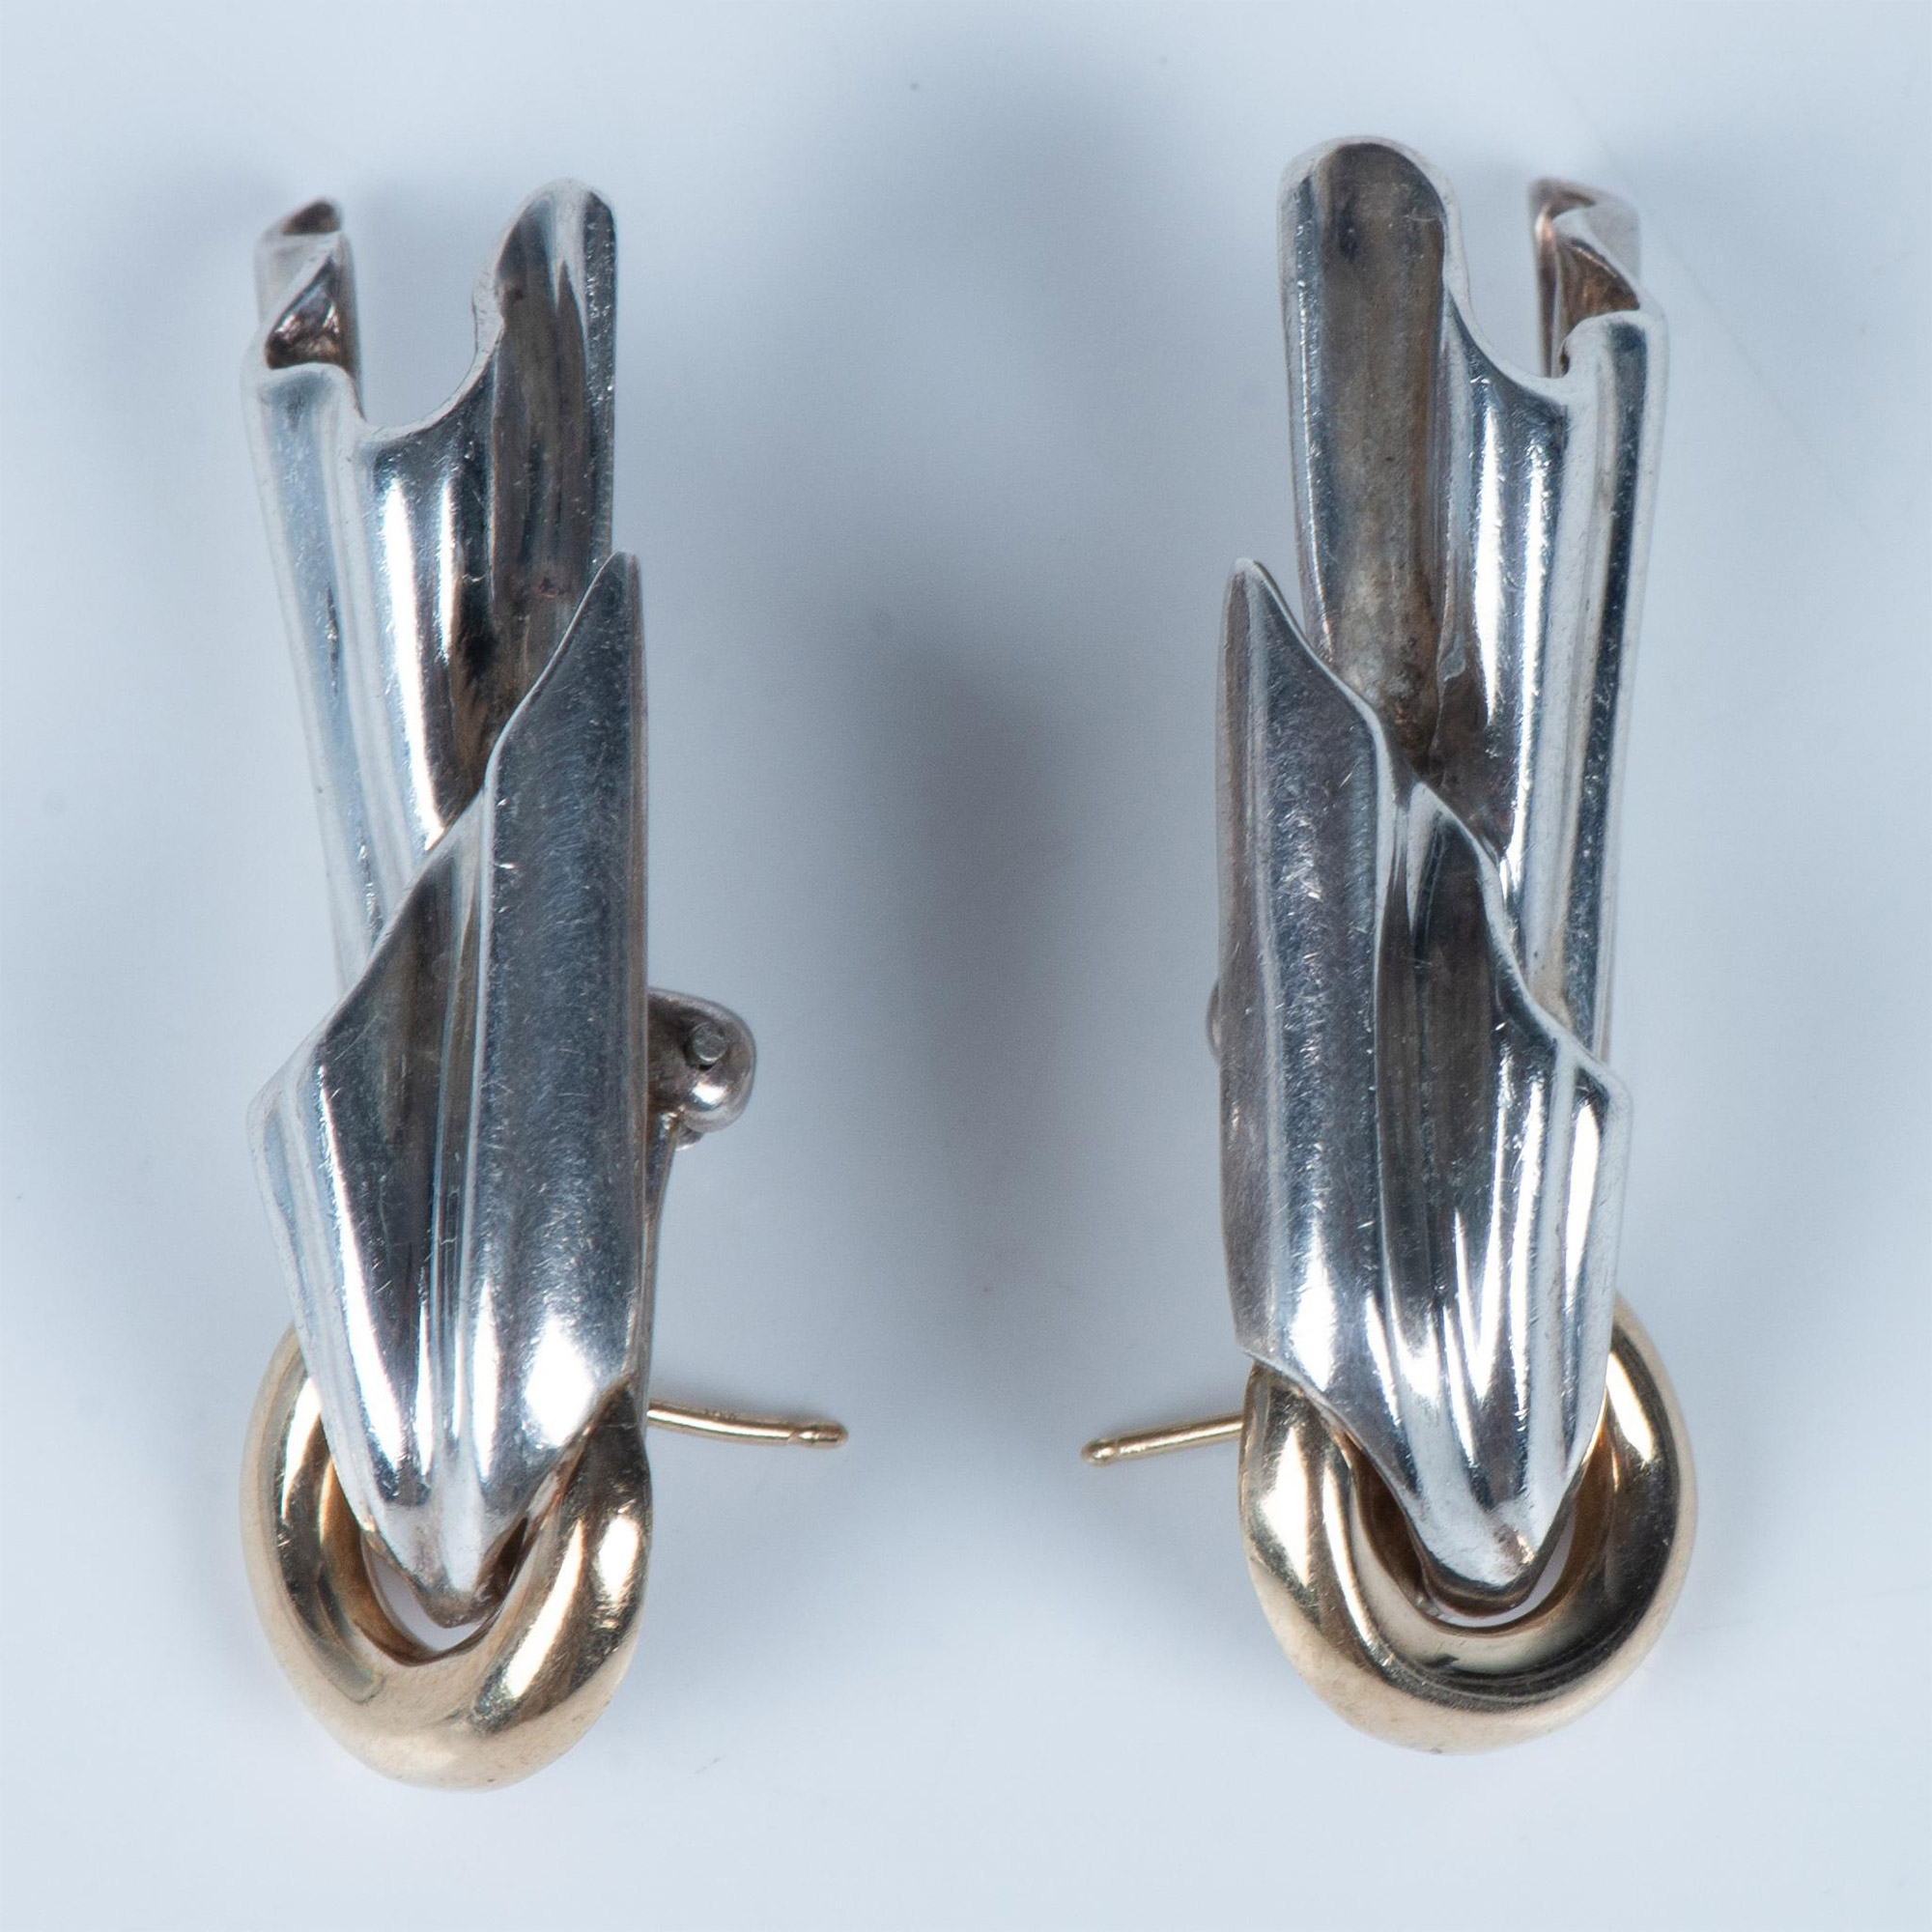 Tiffany & Co. Sterling Silver and Gold Earrings - Image 5 of 7